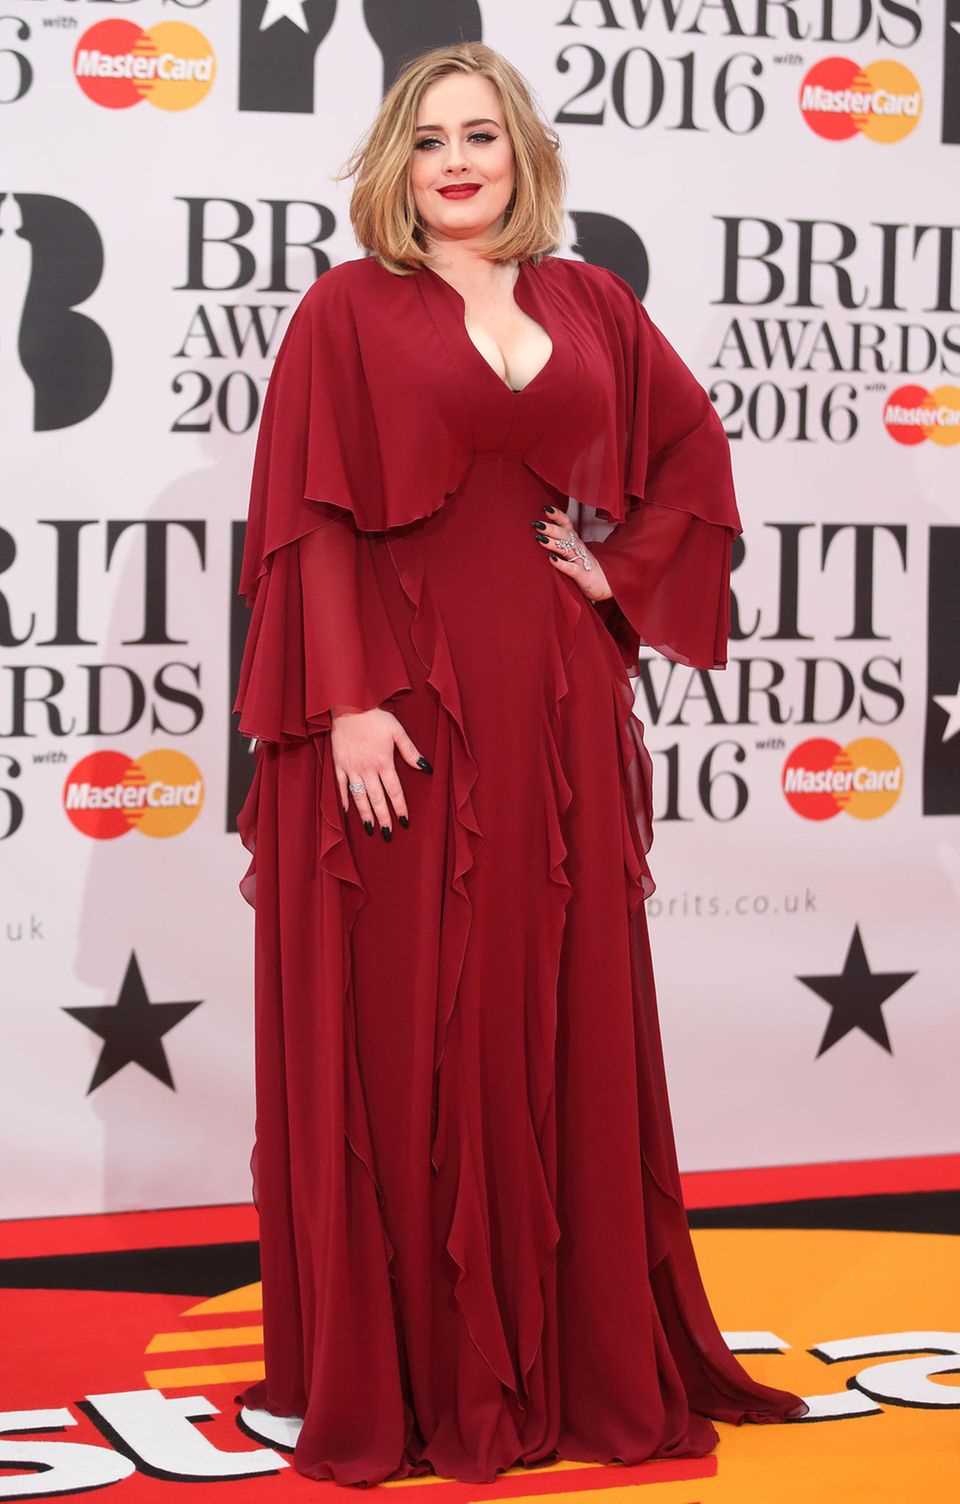 Adele at the 2016 Brit Awards.